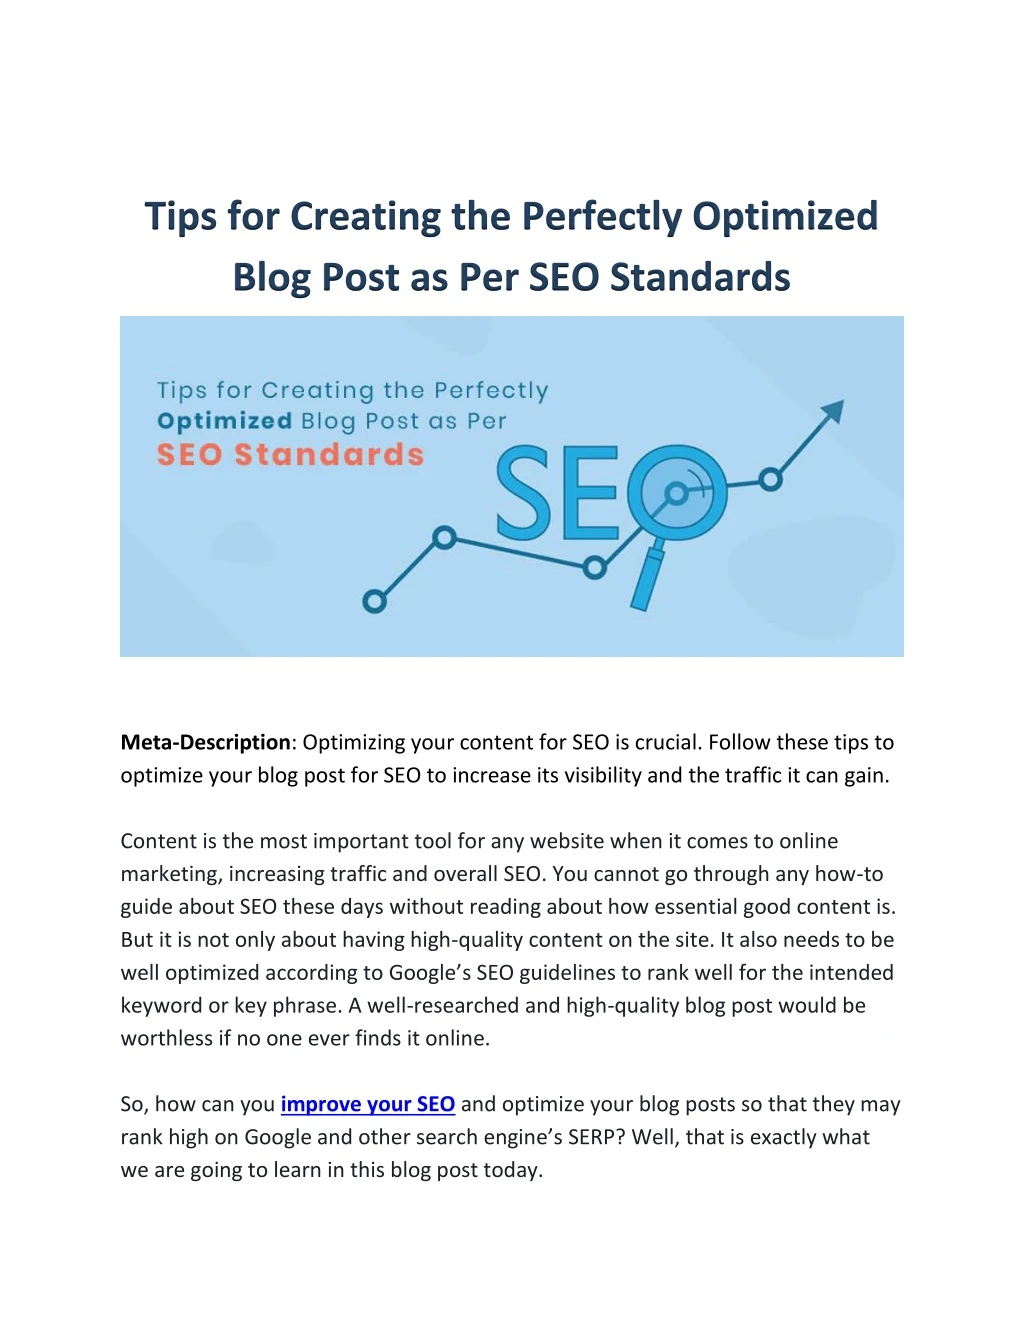 tips for creating the perfectly optimized blog